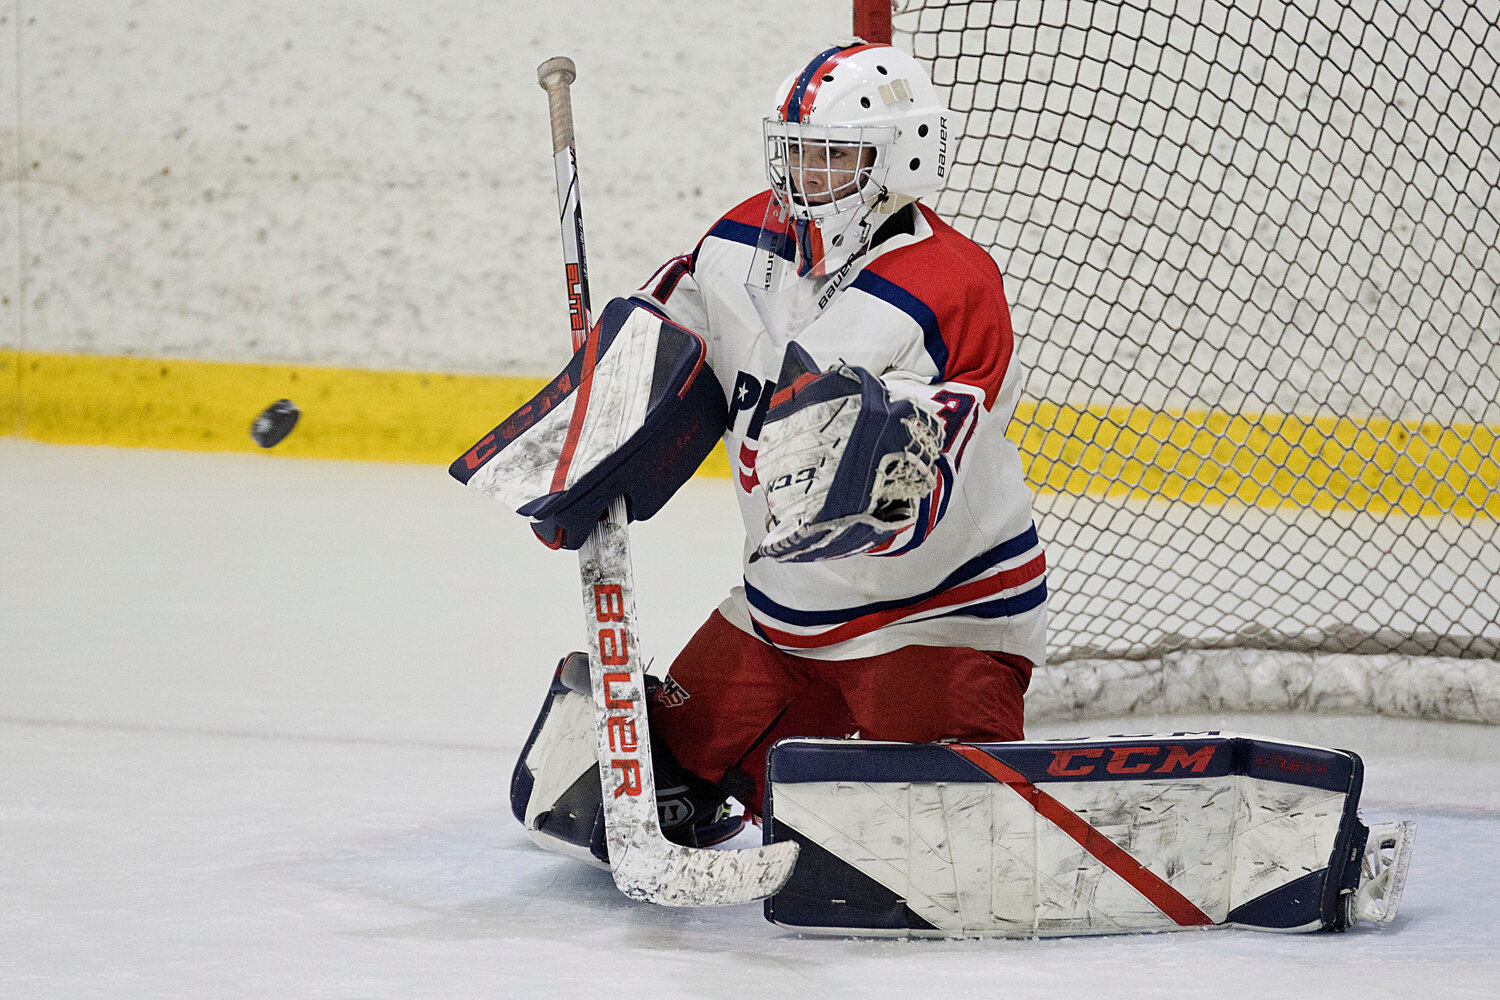 Patriots’ goalie Jonathan Cabral makes a glove save while battling the Rebels.